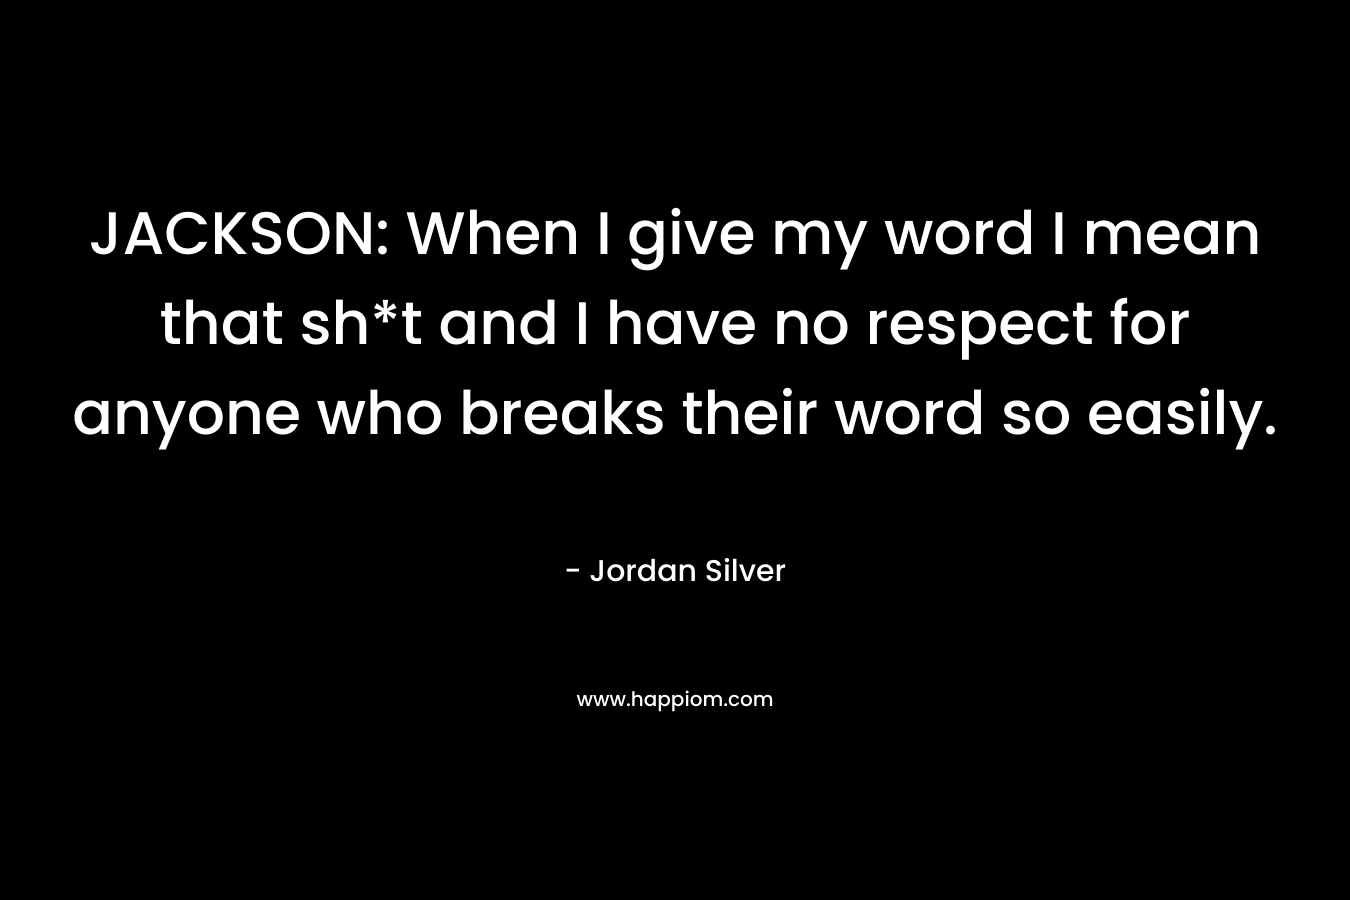 JACKSON: When I give my word I mean that sh*t and I have no respect for anyone who breaks their word so easily. – Jordan Silver